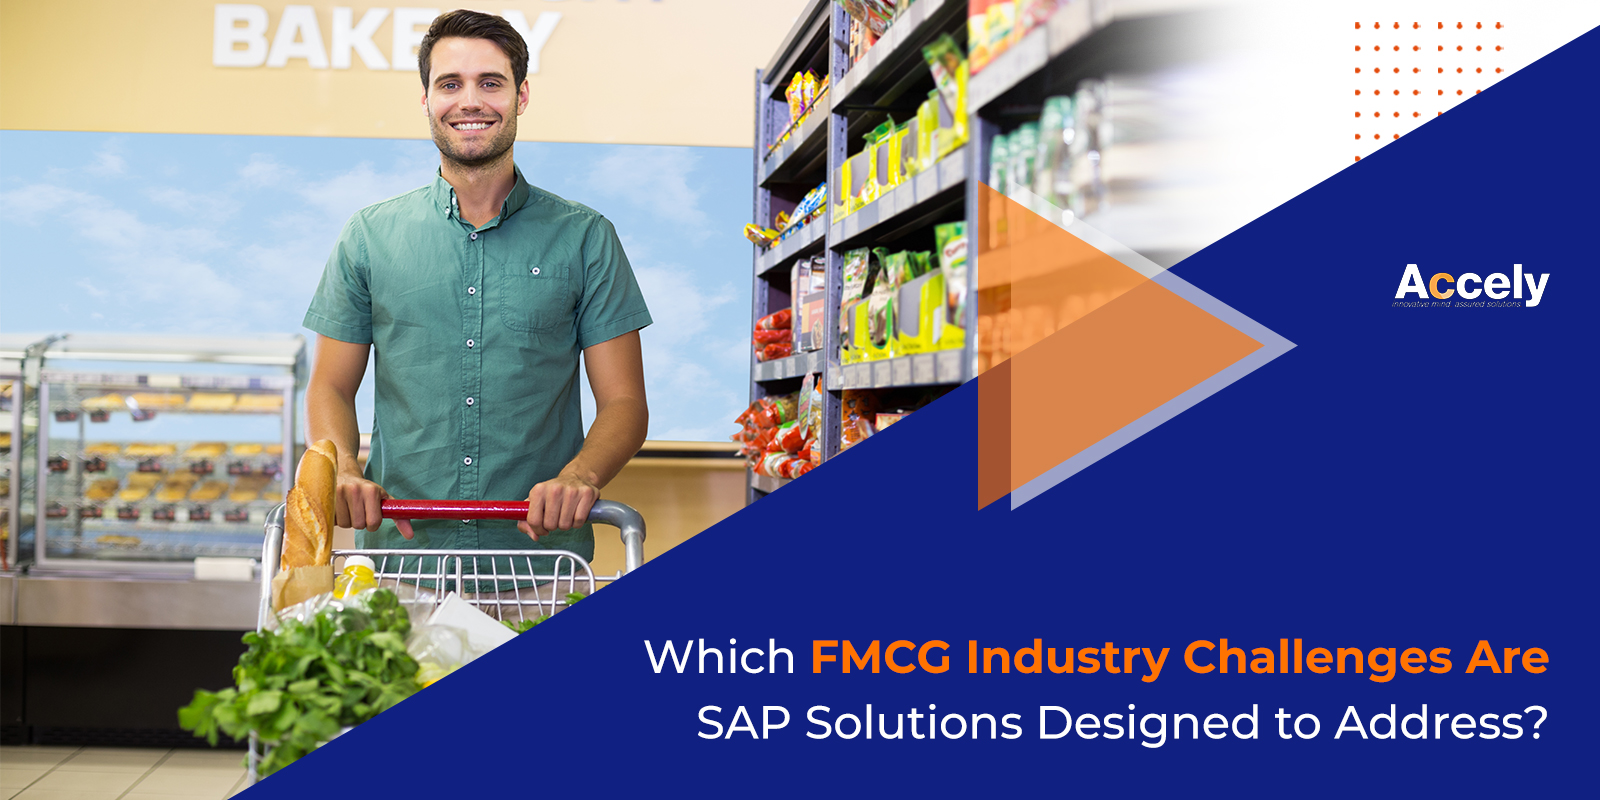 Which FMCG Industry Challenges Are SAP Solutions Designed to Address?